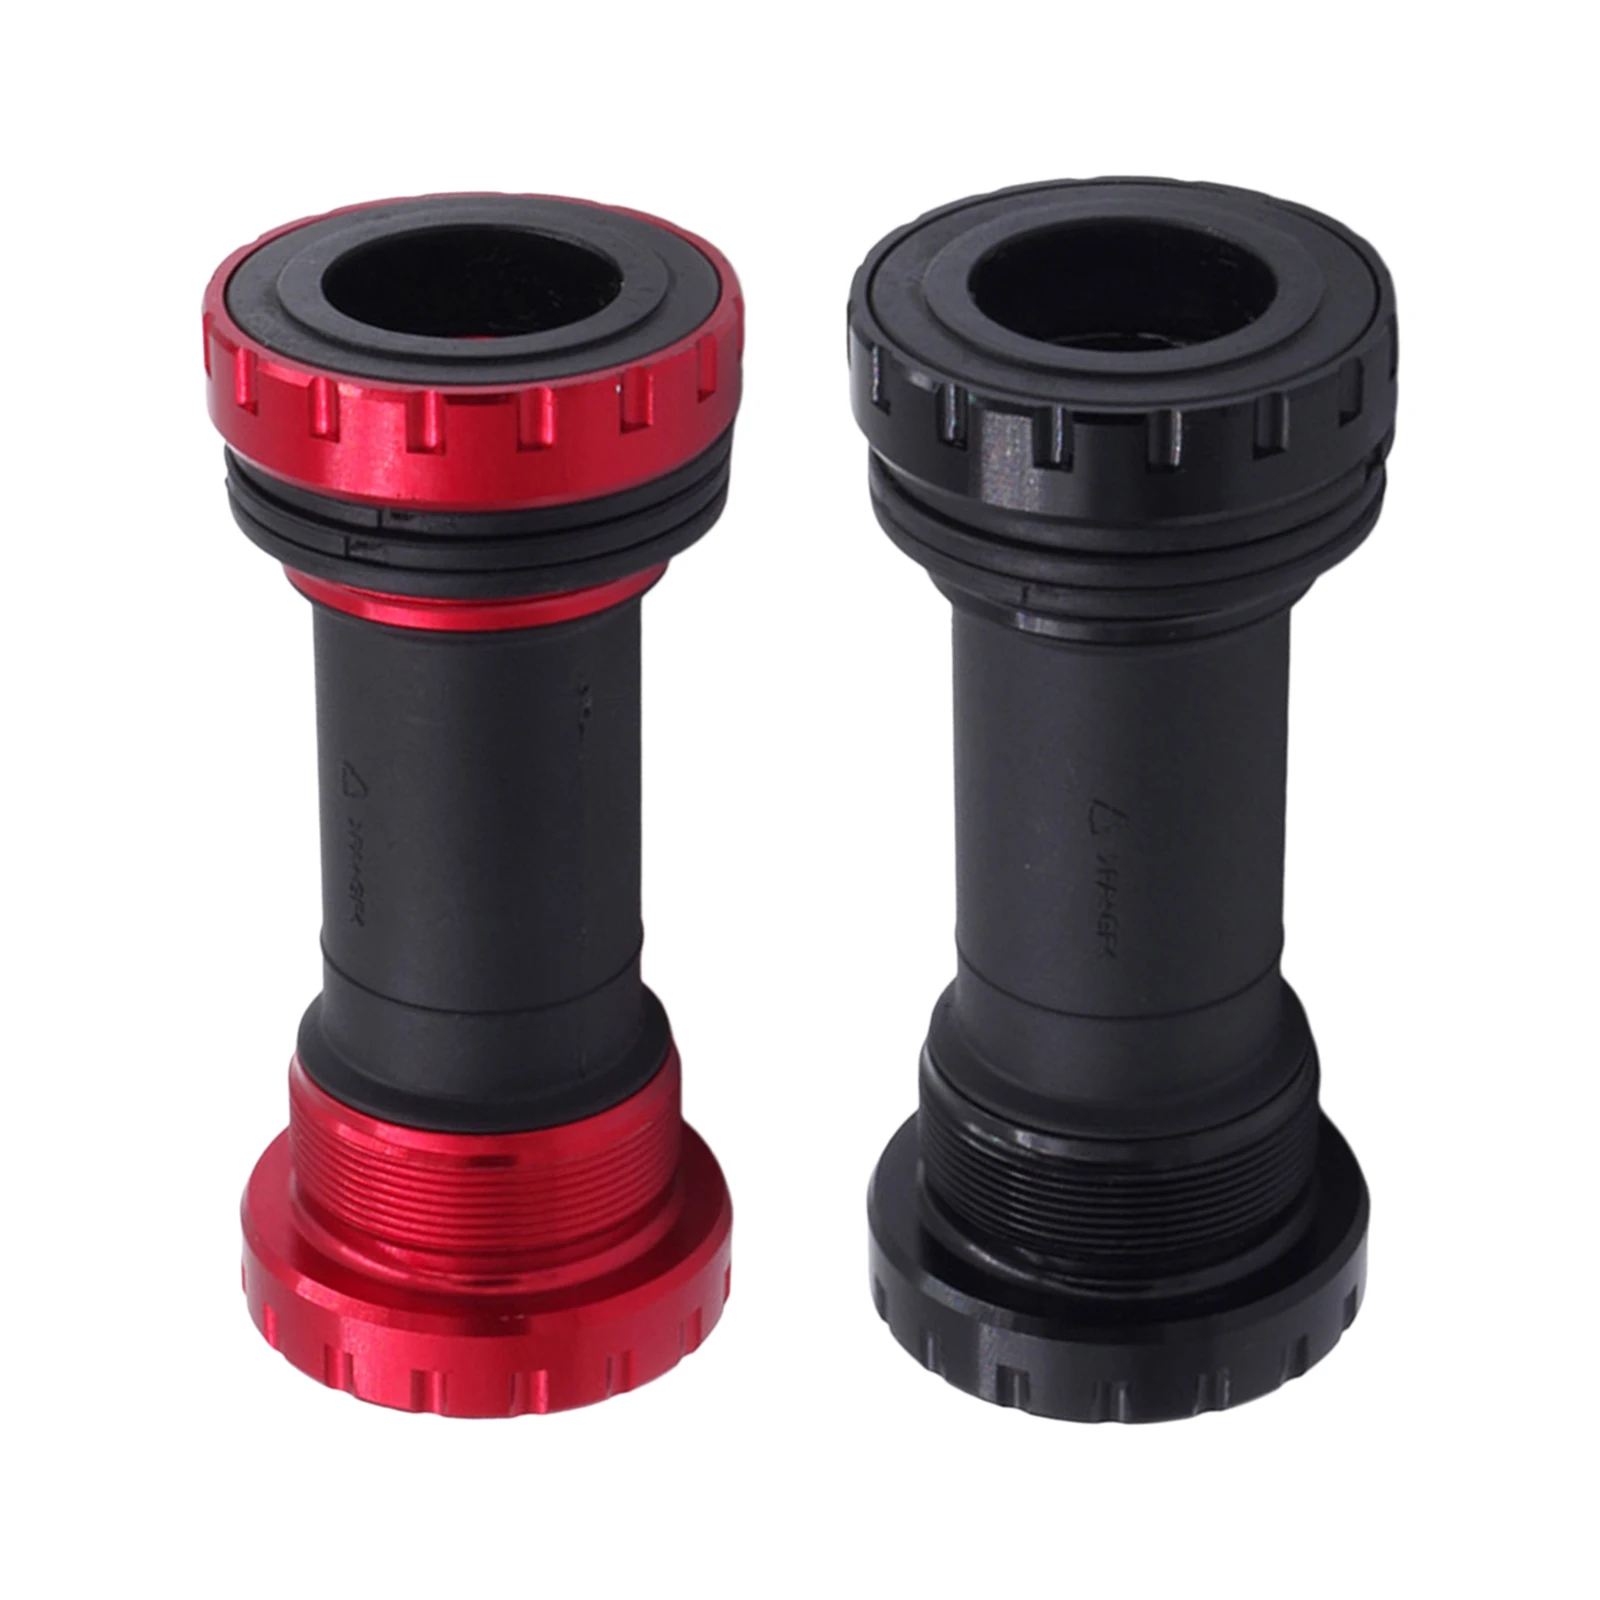 24mm Adapter Bearing Press Fit Bicycle Bottom Brackets Axle for MTB Road bike parts 24 Crankset chainset